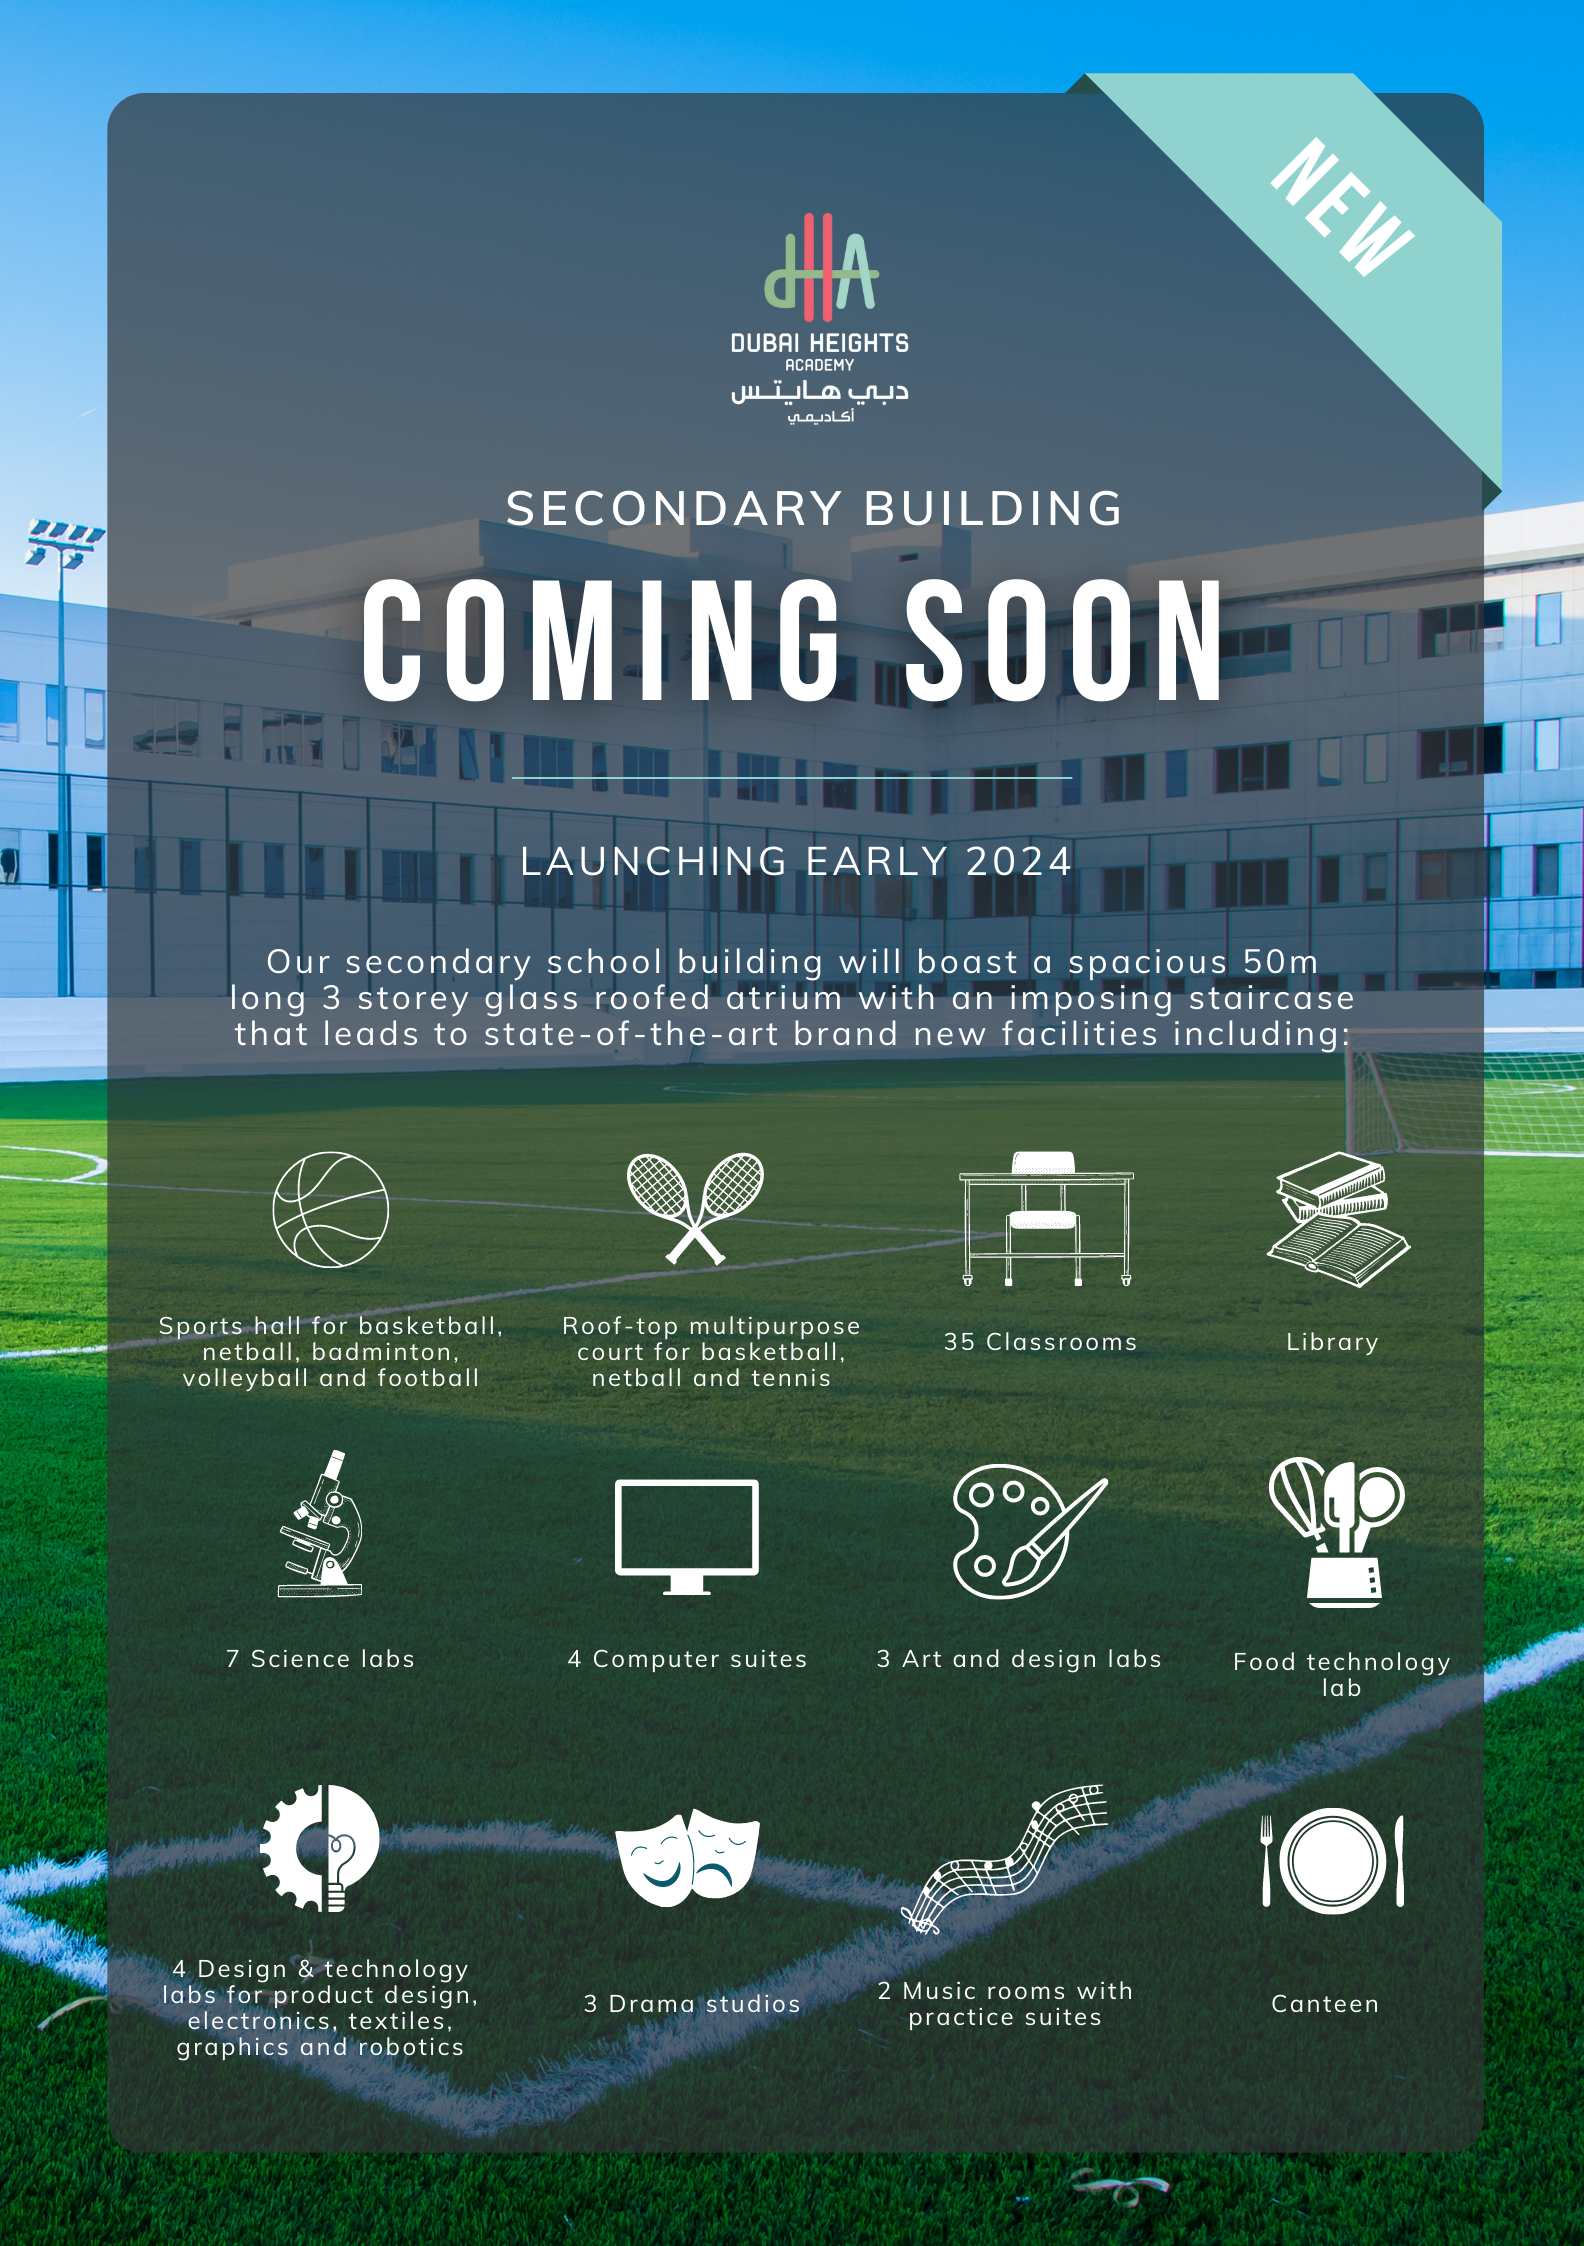 Rising to new heights: Dubai Heights Academy prepares to launch spectacular new secondary building in early 2024